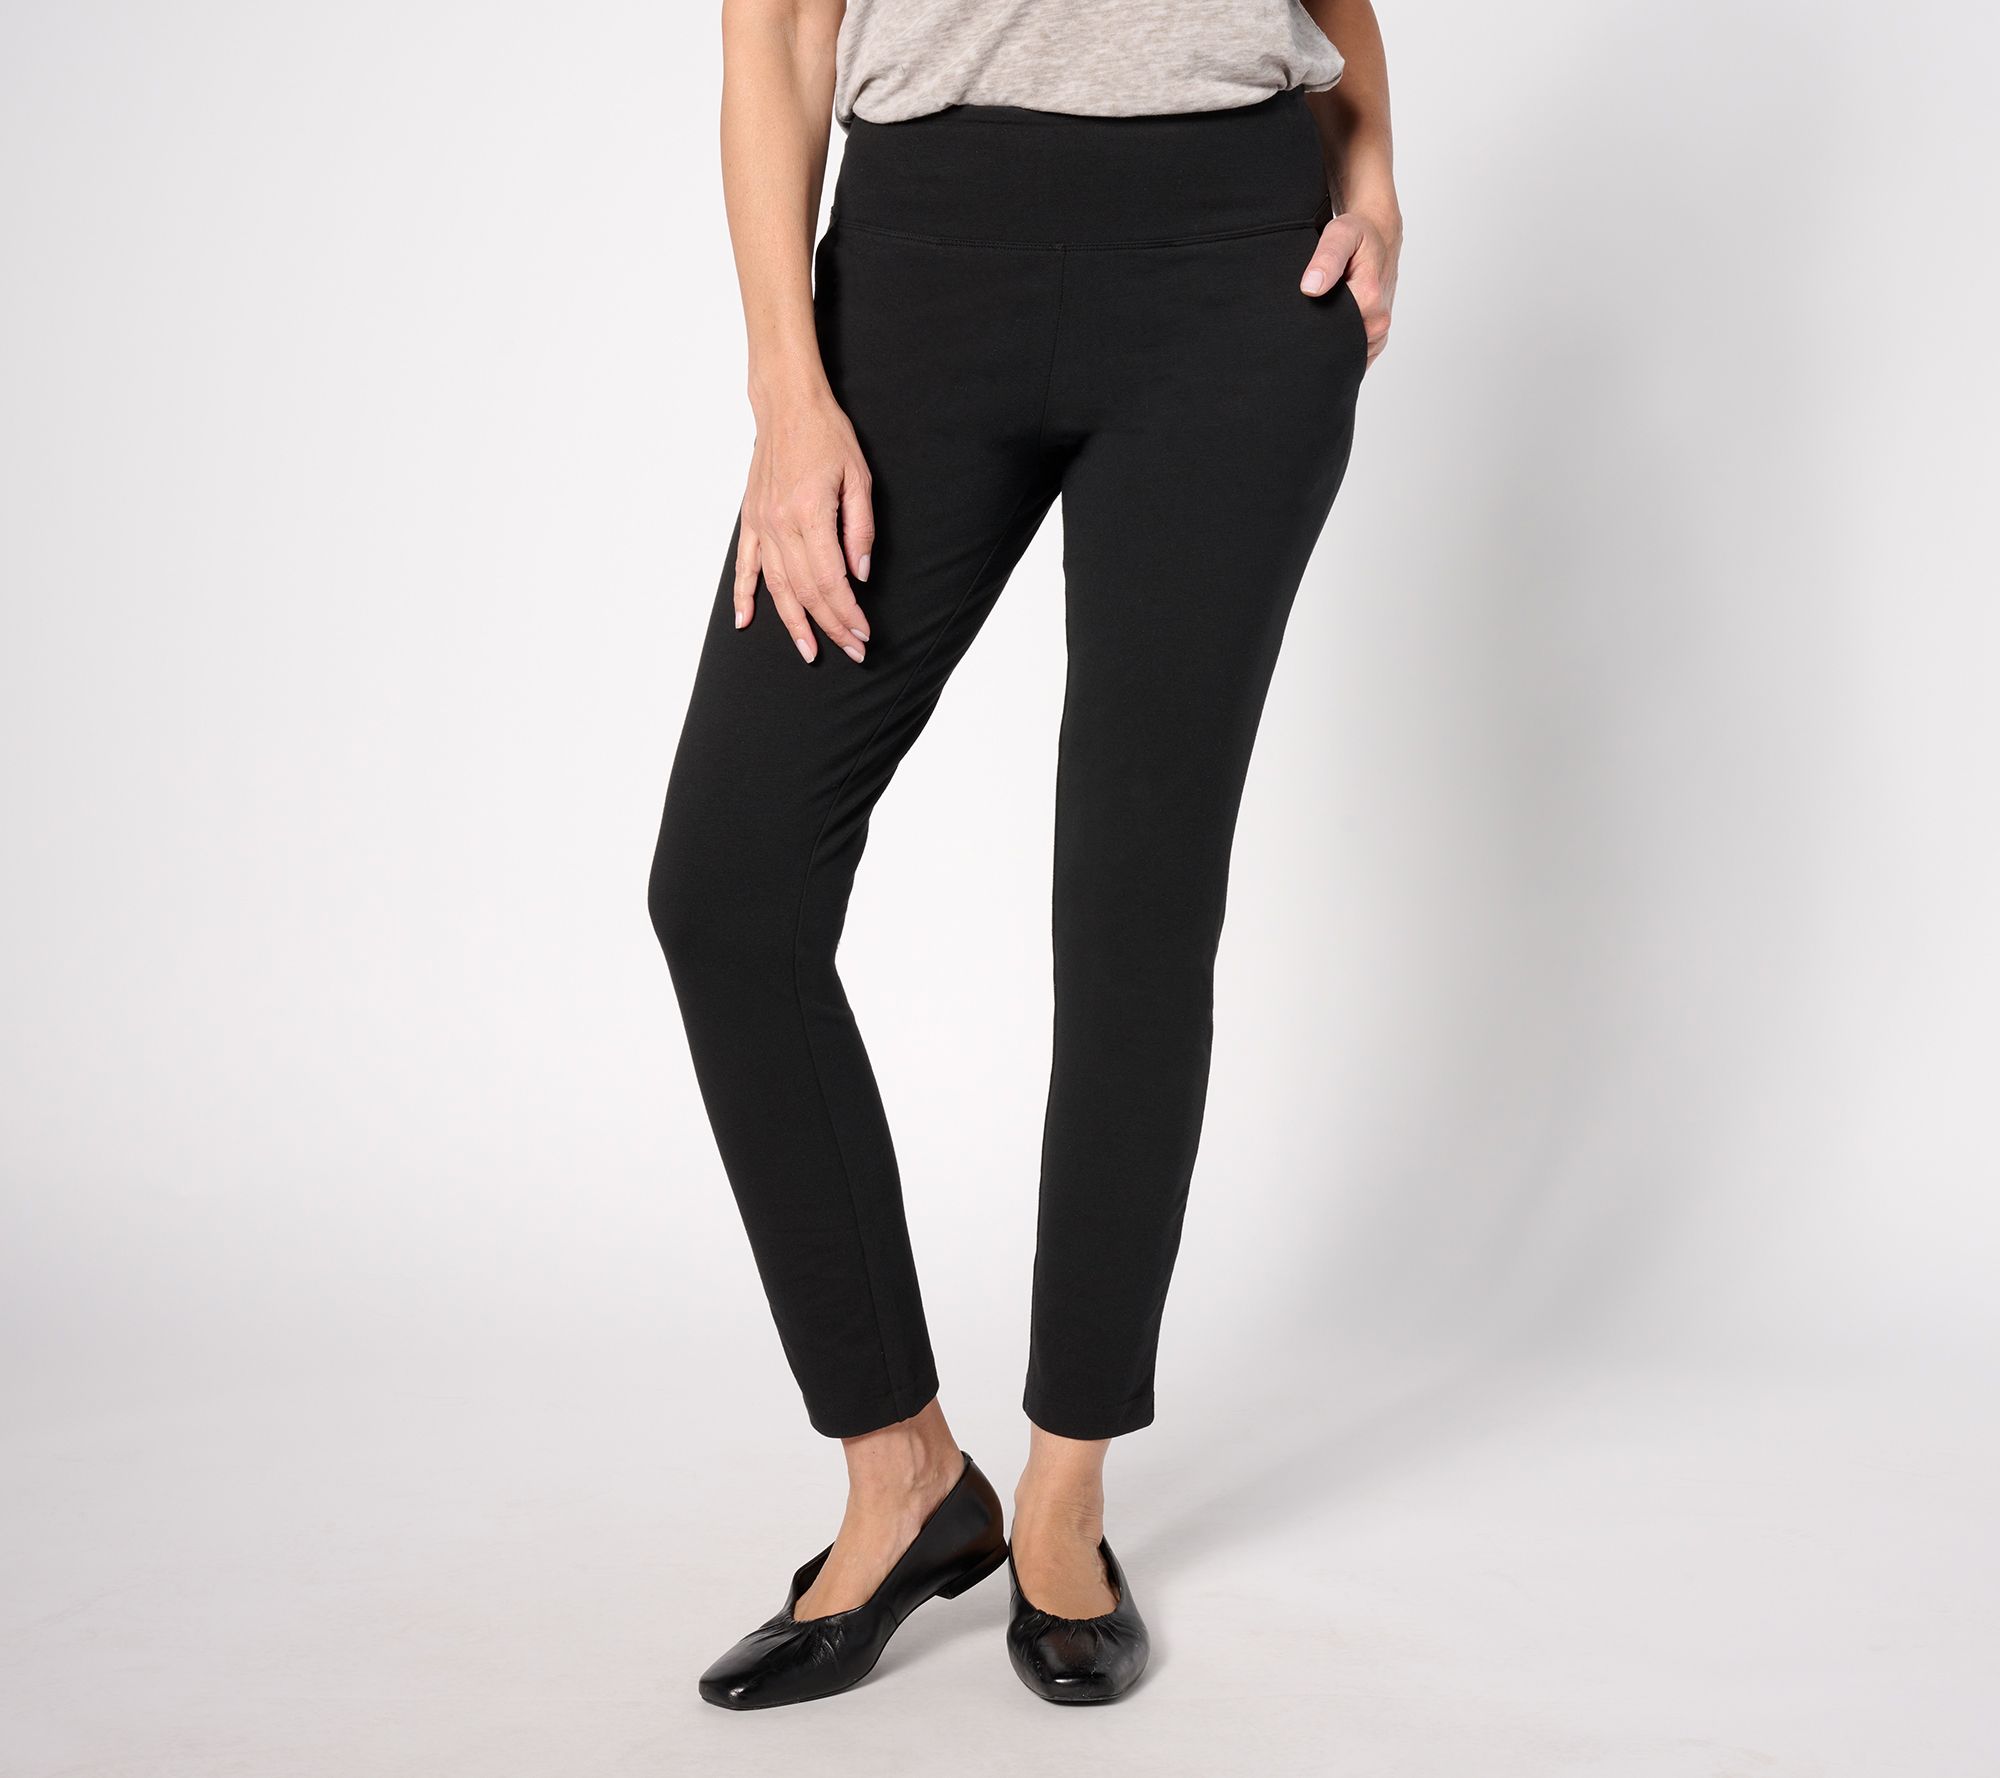 Ways to Style: Women with Control Tummy Control Pants  No more wiggle, no  more jiggle! Mrs. Renee Greenstein is shaking things up with pants that  give you the comfort you need